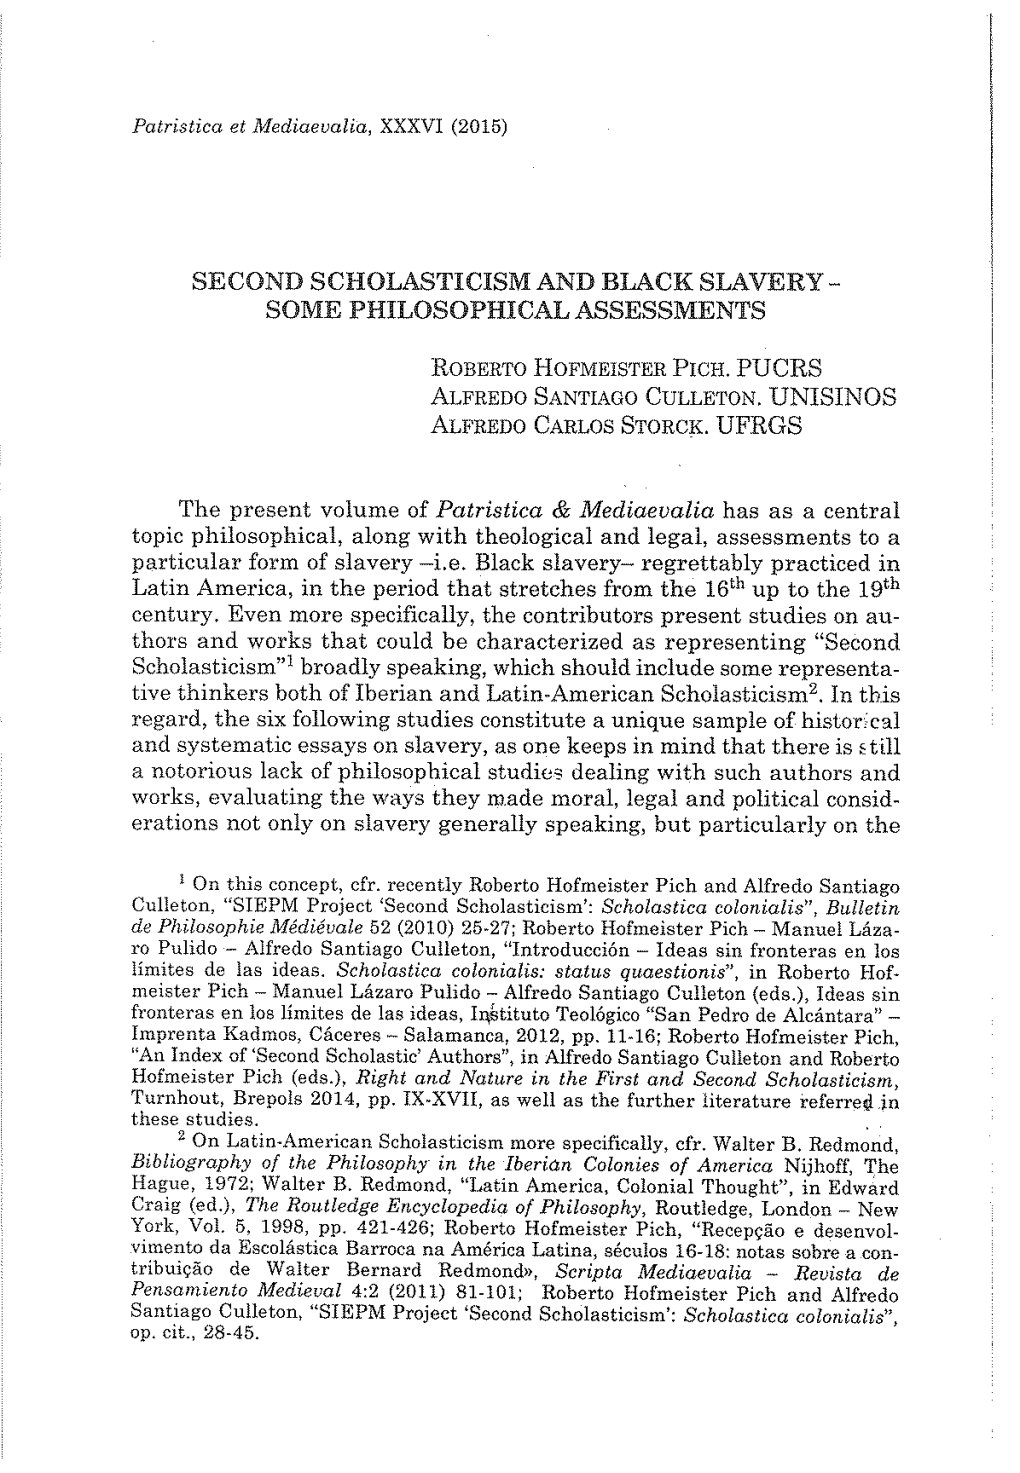 Second Scholasticism and Black Slavery - Some Philosophical Assessments